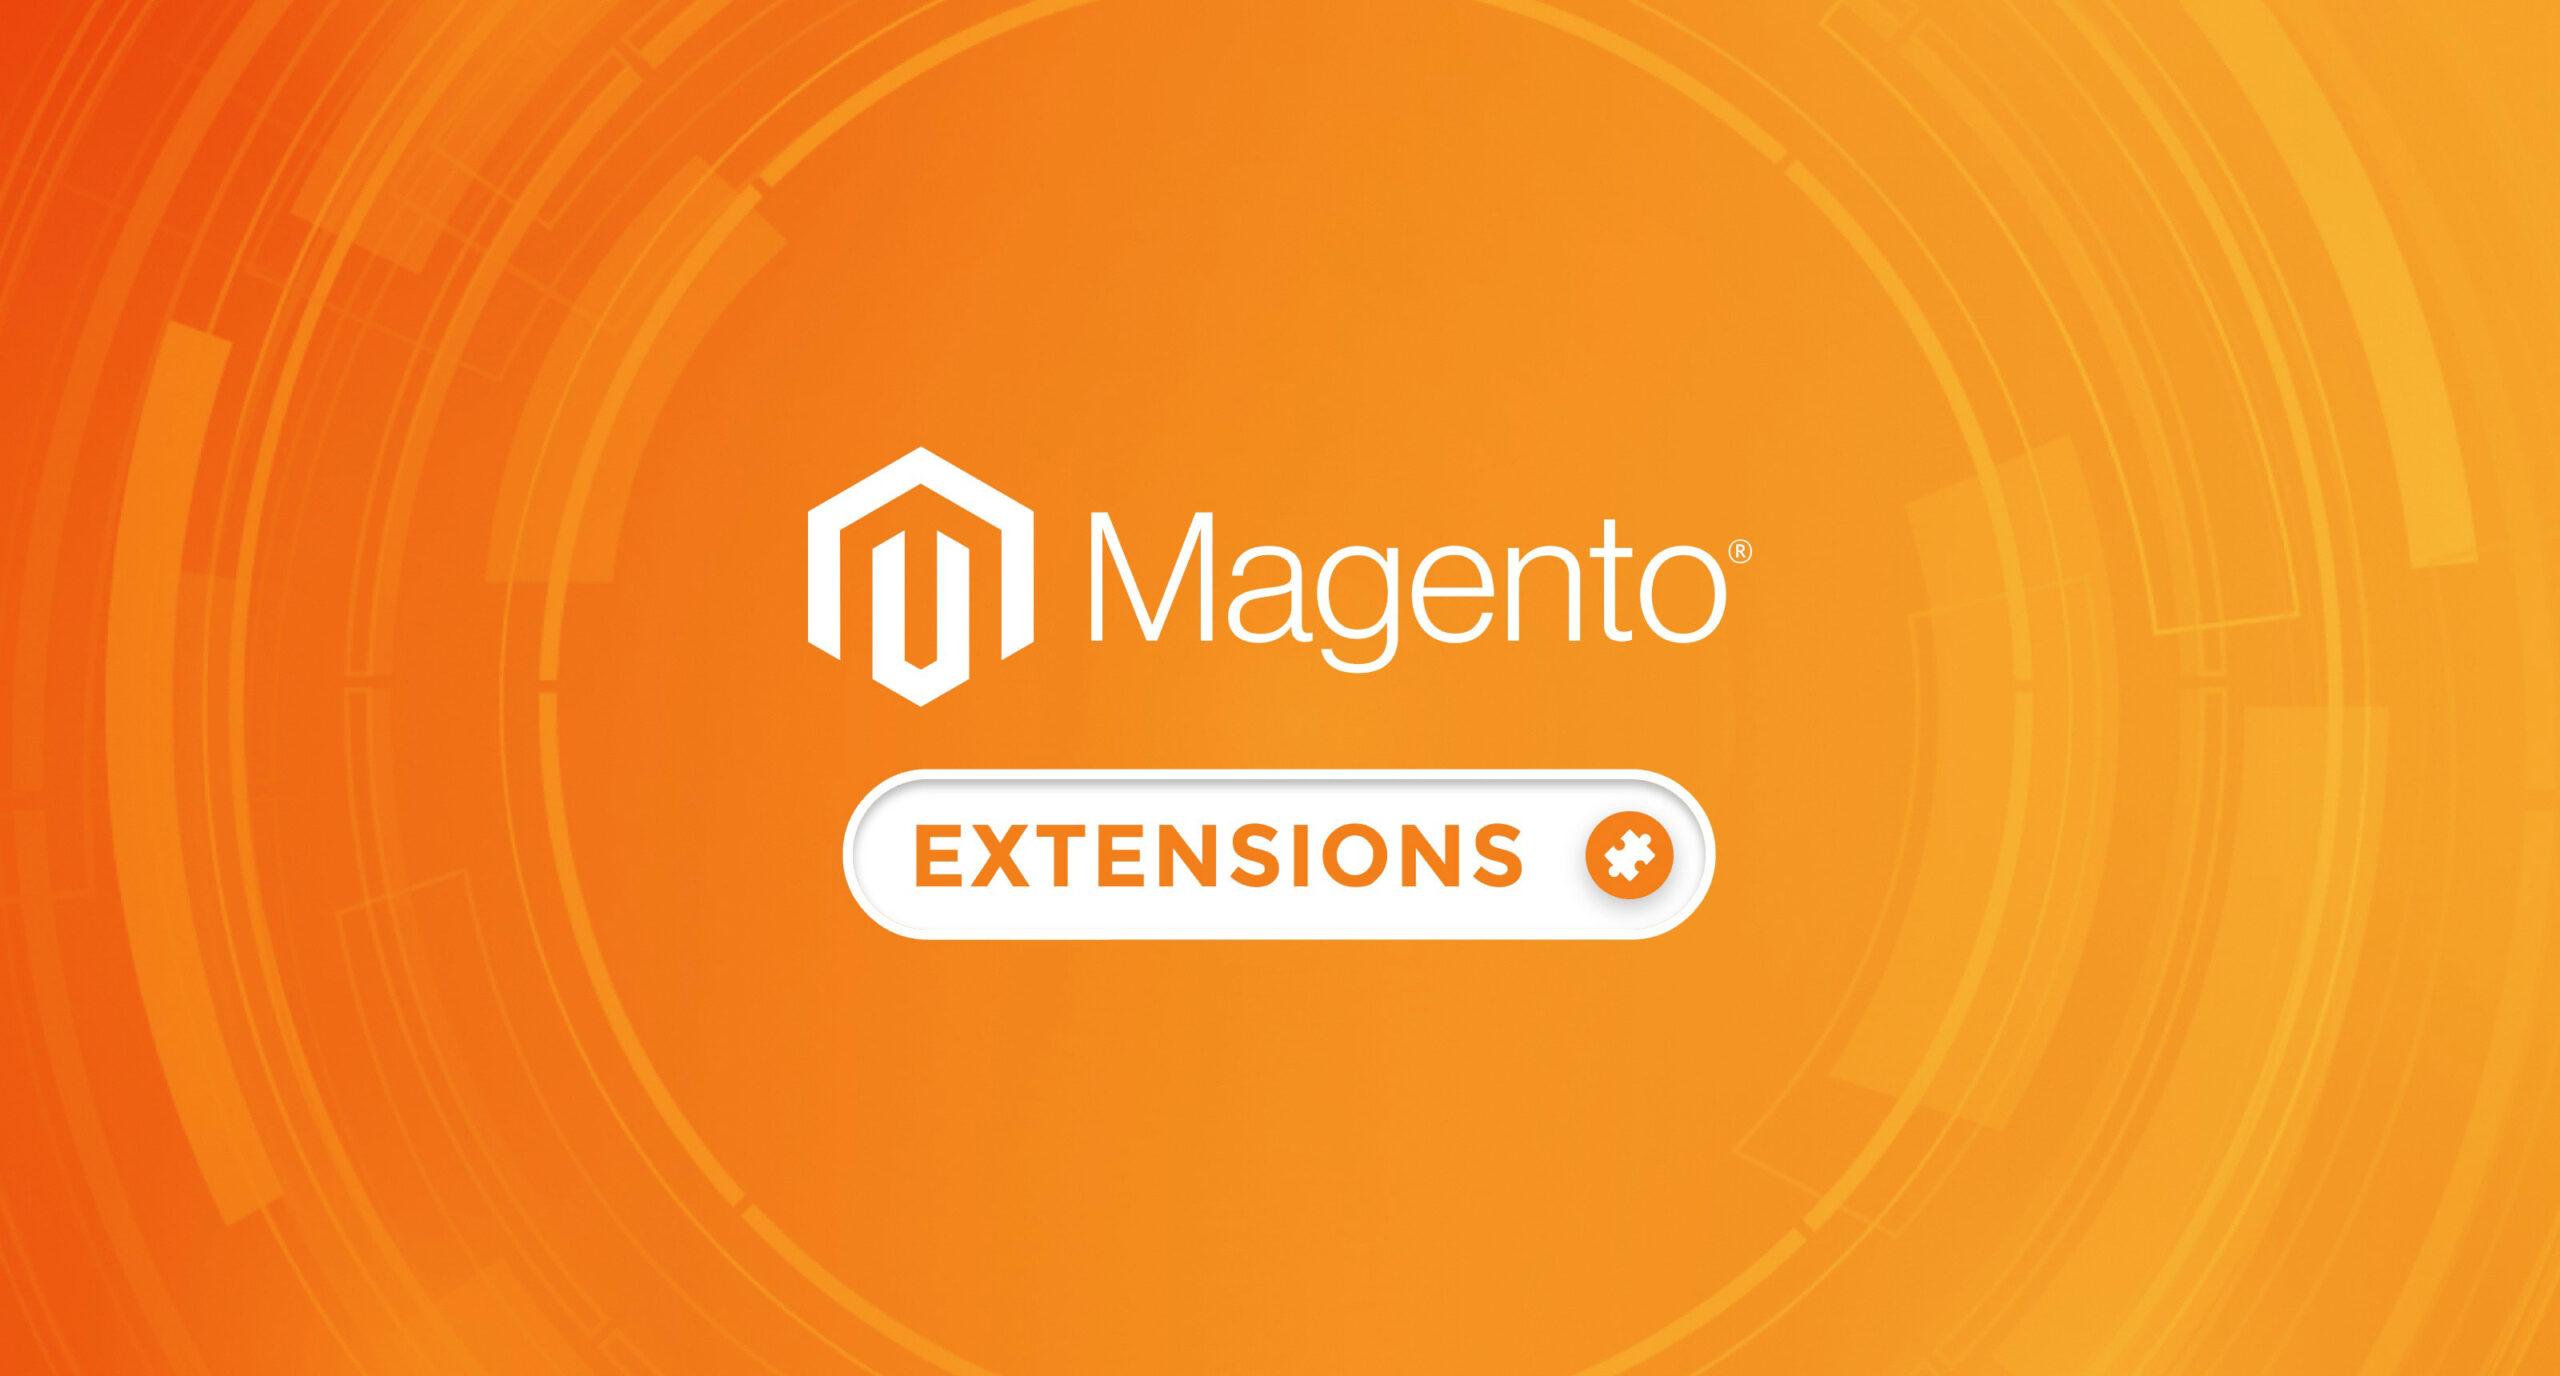 6 Best Practices Before Installing a Magento Extension